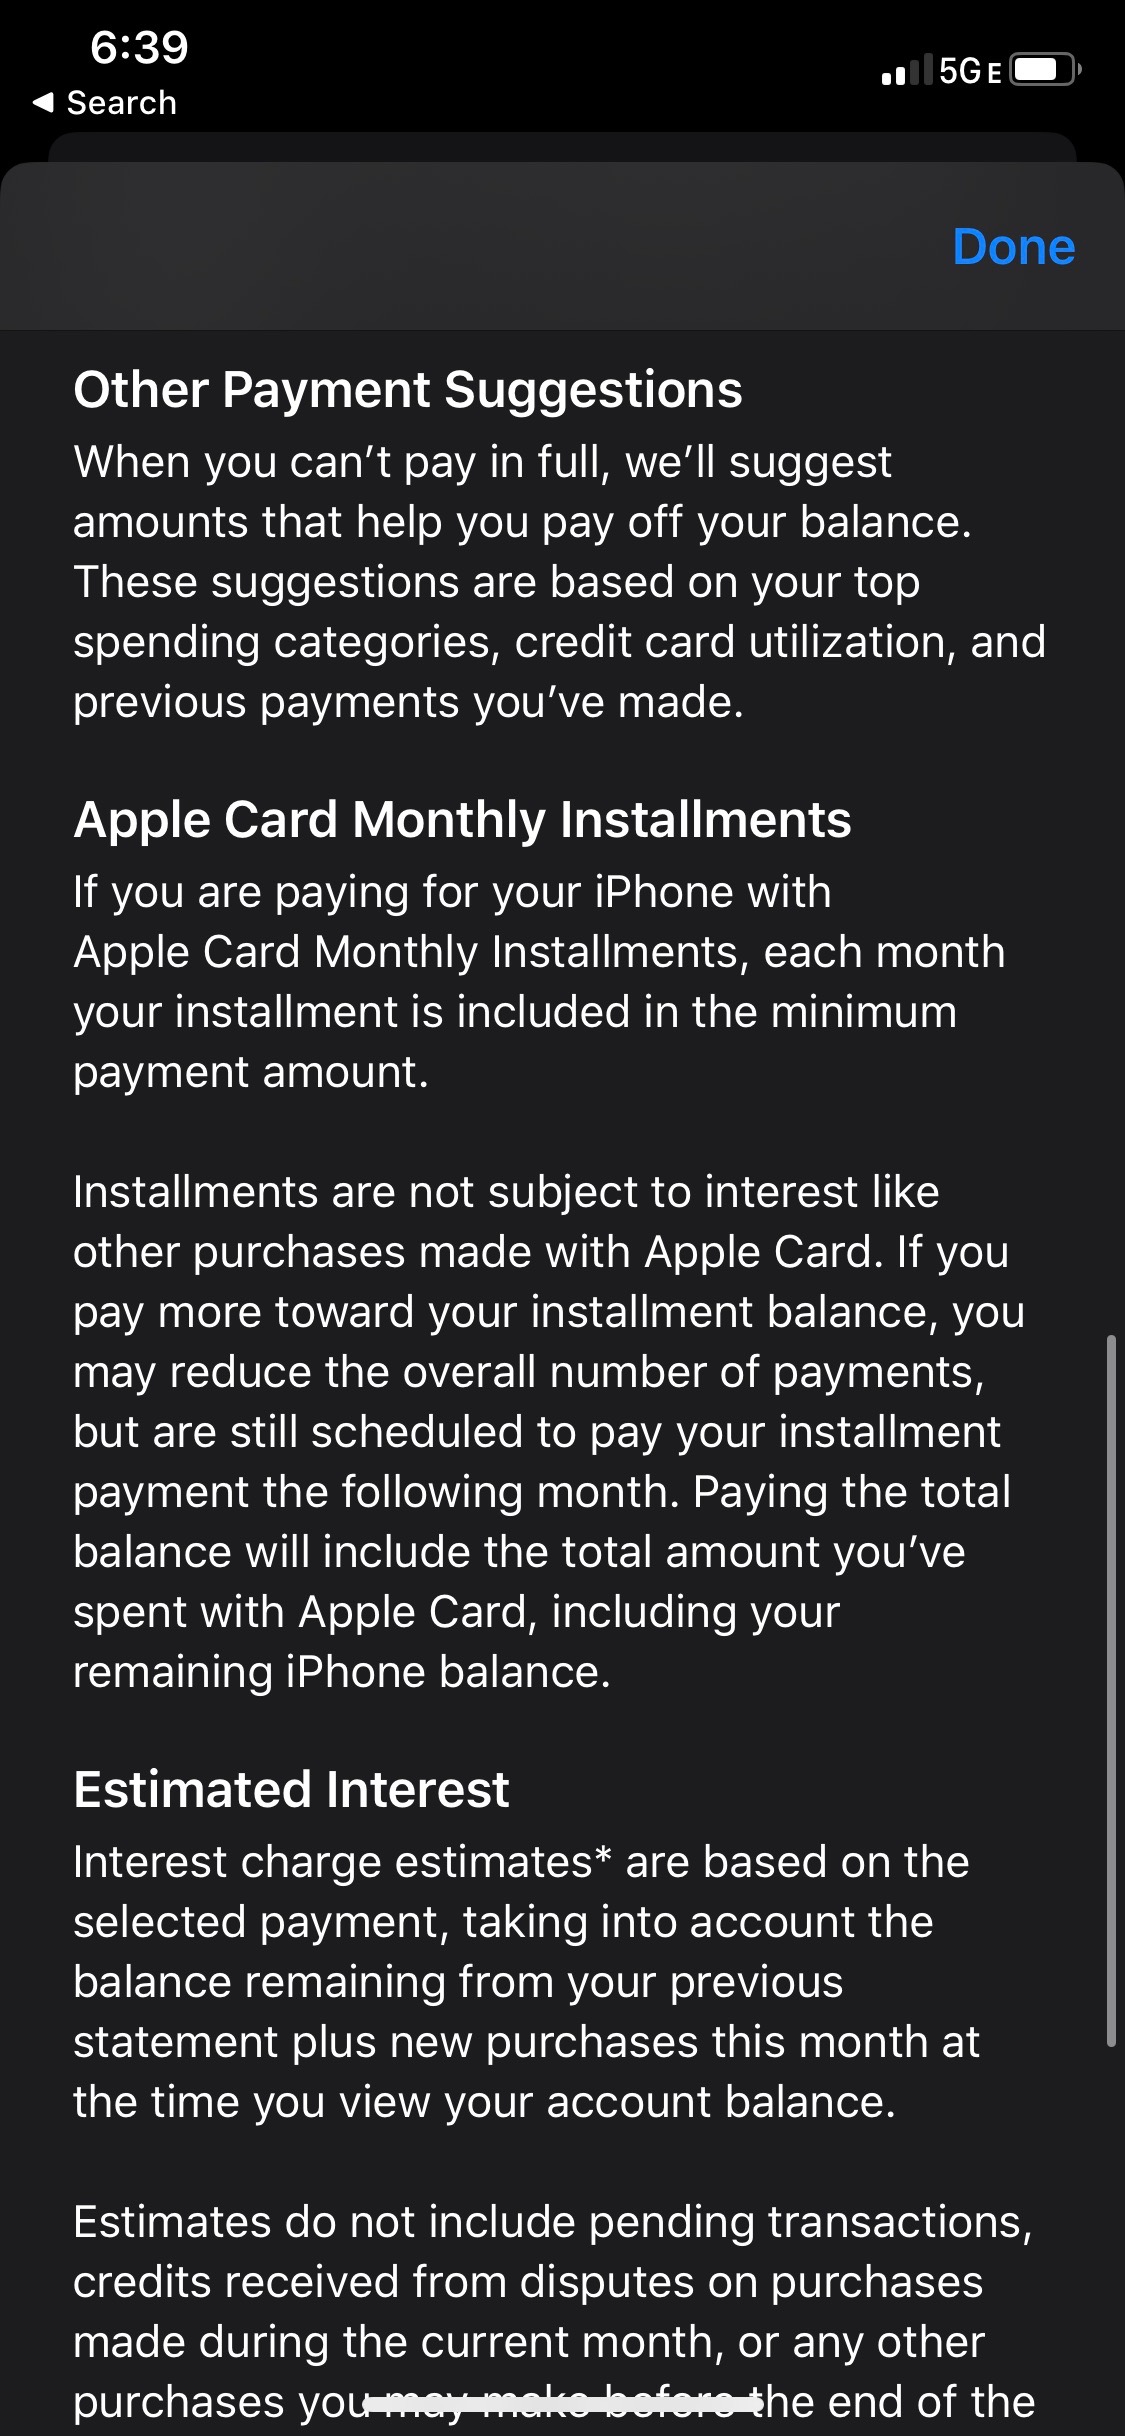 Apple Details Paying for iPhone With 0% Interest Apple Card Monthly Installments